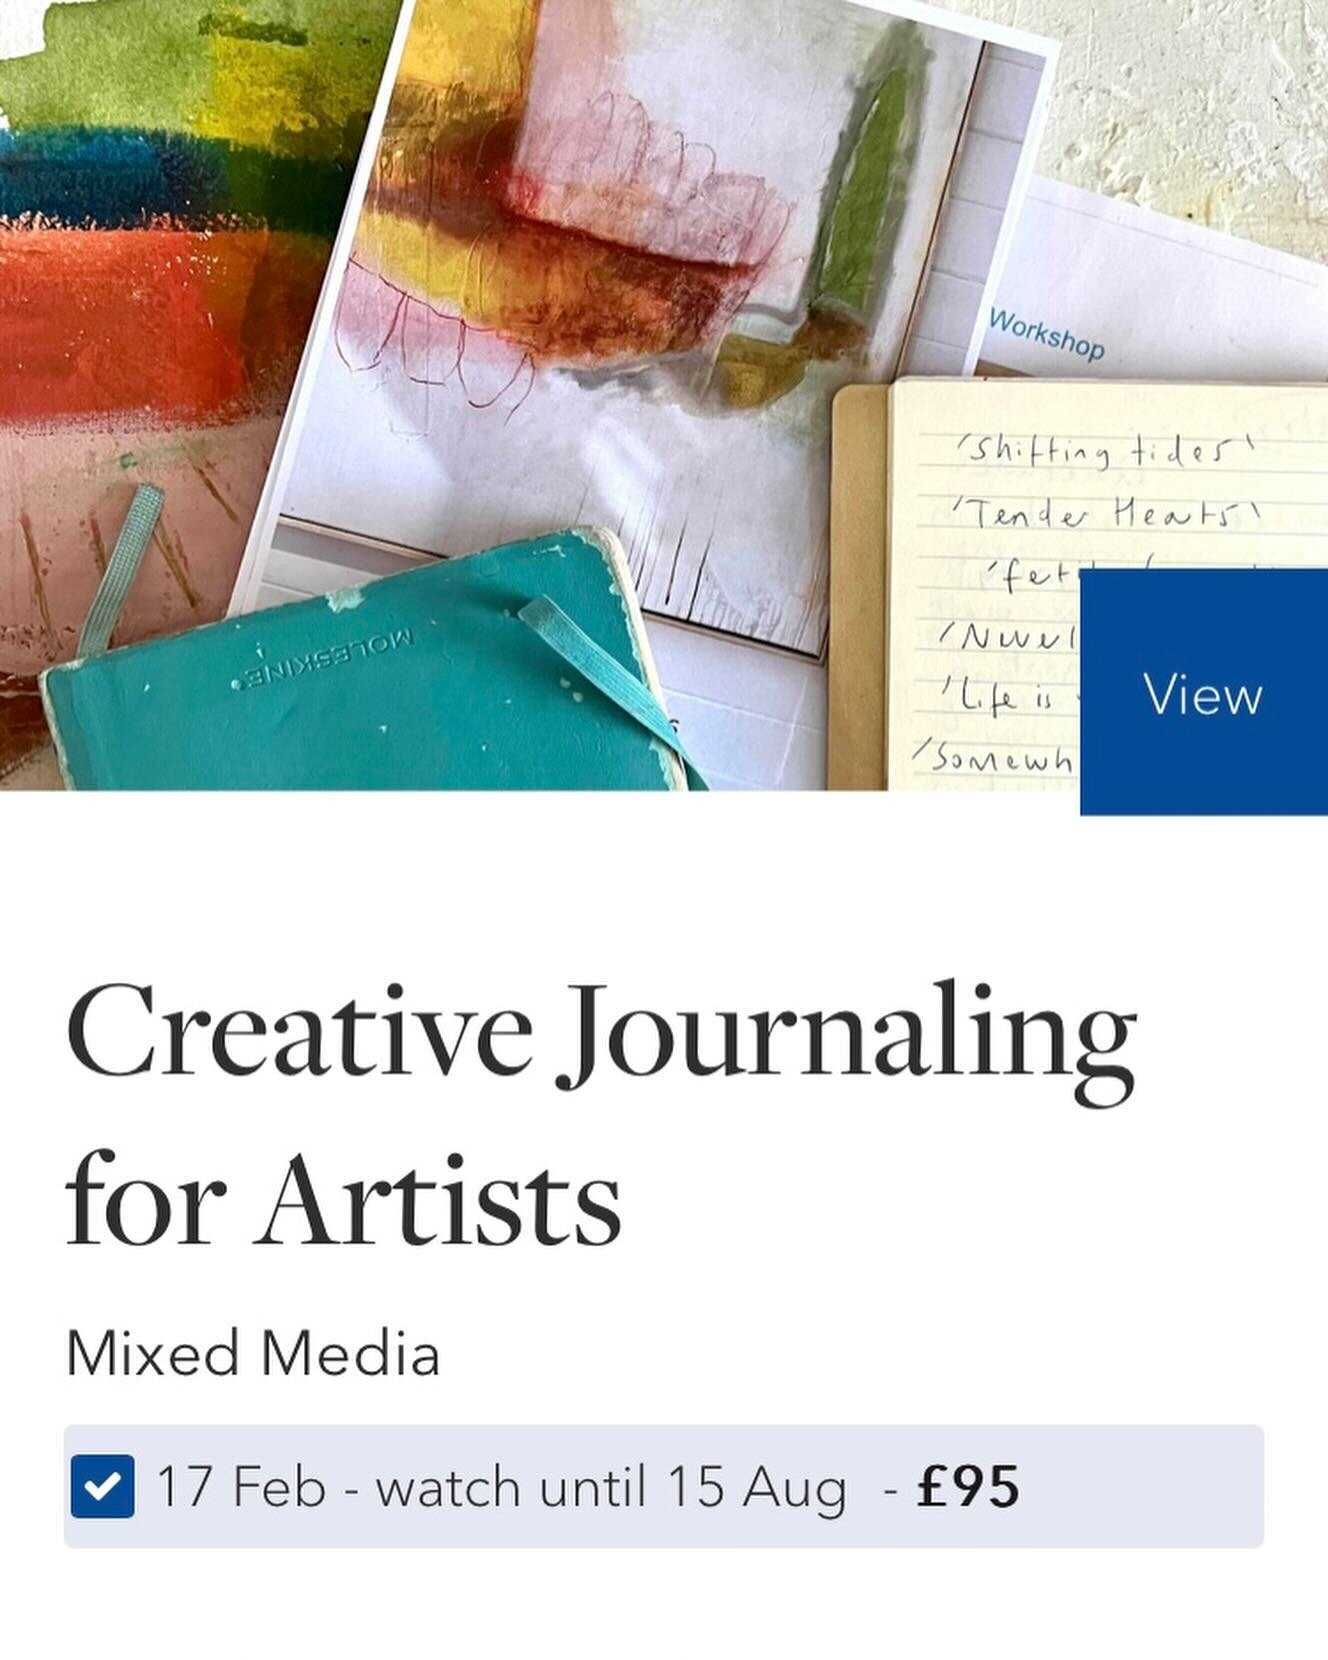 Creative Art Journaling Online Course! 🌈✨

I&rsquo;m really pleased to be delivering a brand new 4 part ONLINE course @stivespainting all about creative art Journaling! 

Join me as I share my tips &amp; tricks to help you develop your own creative 